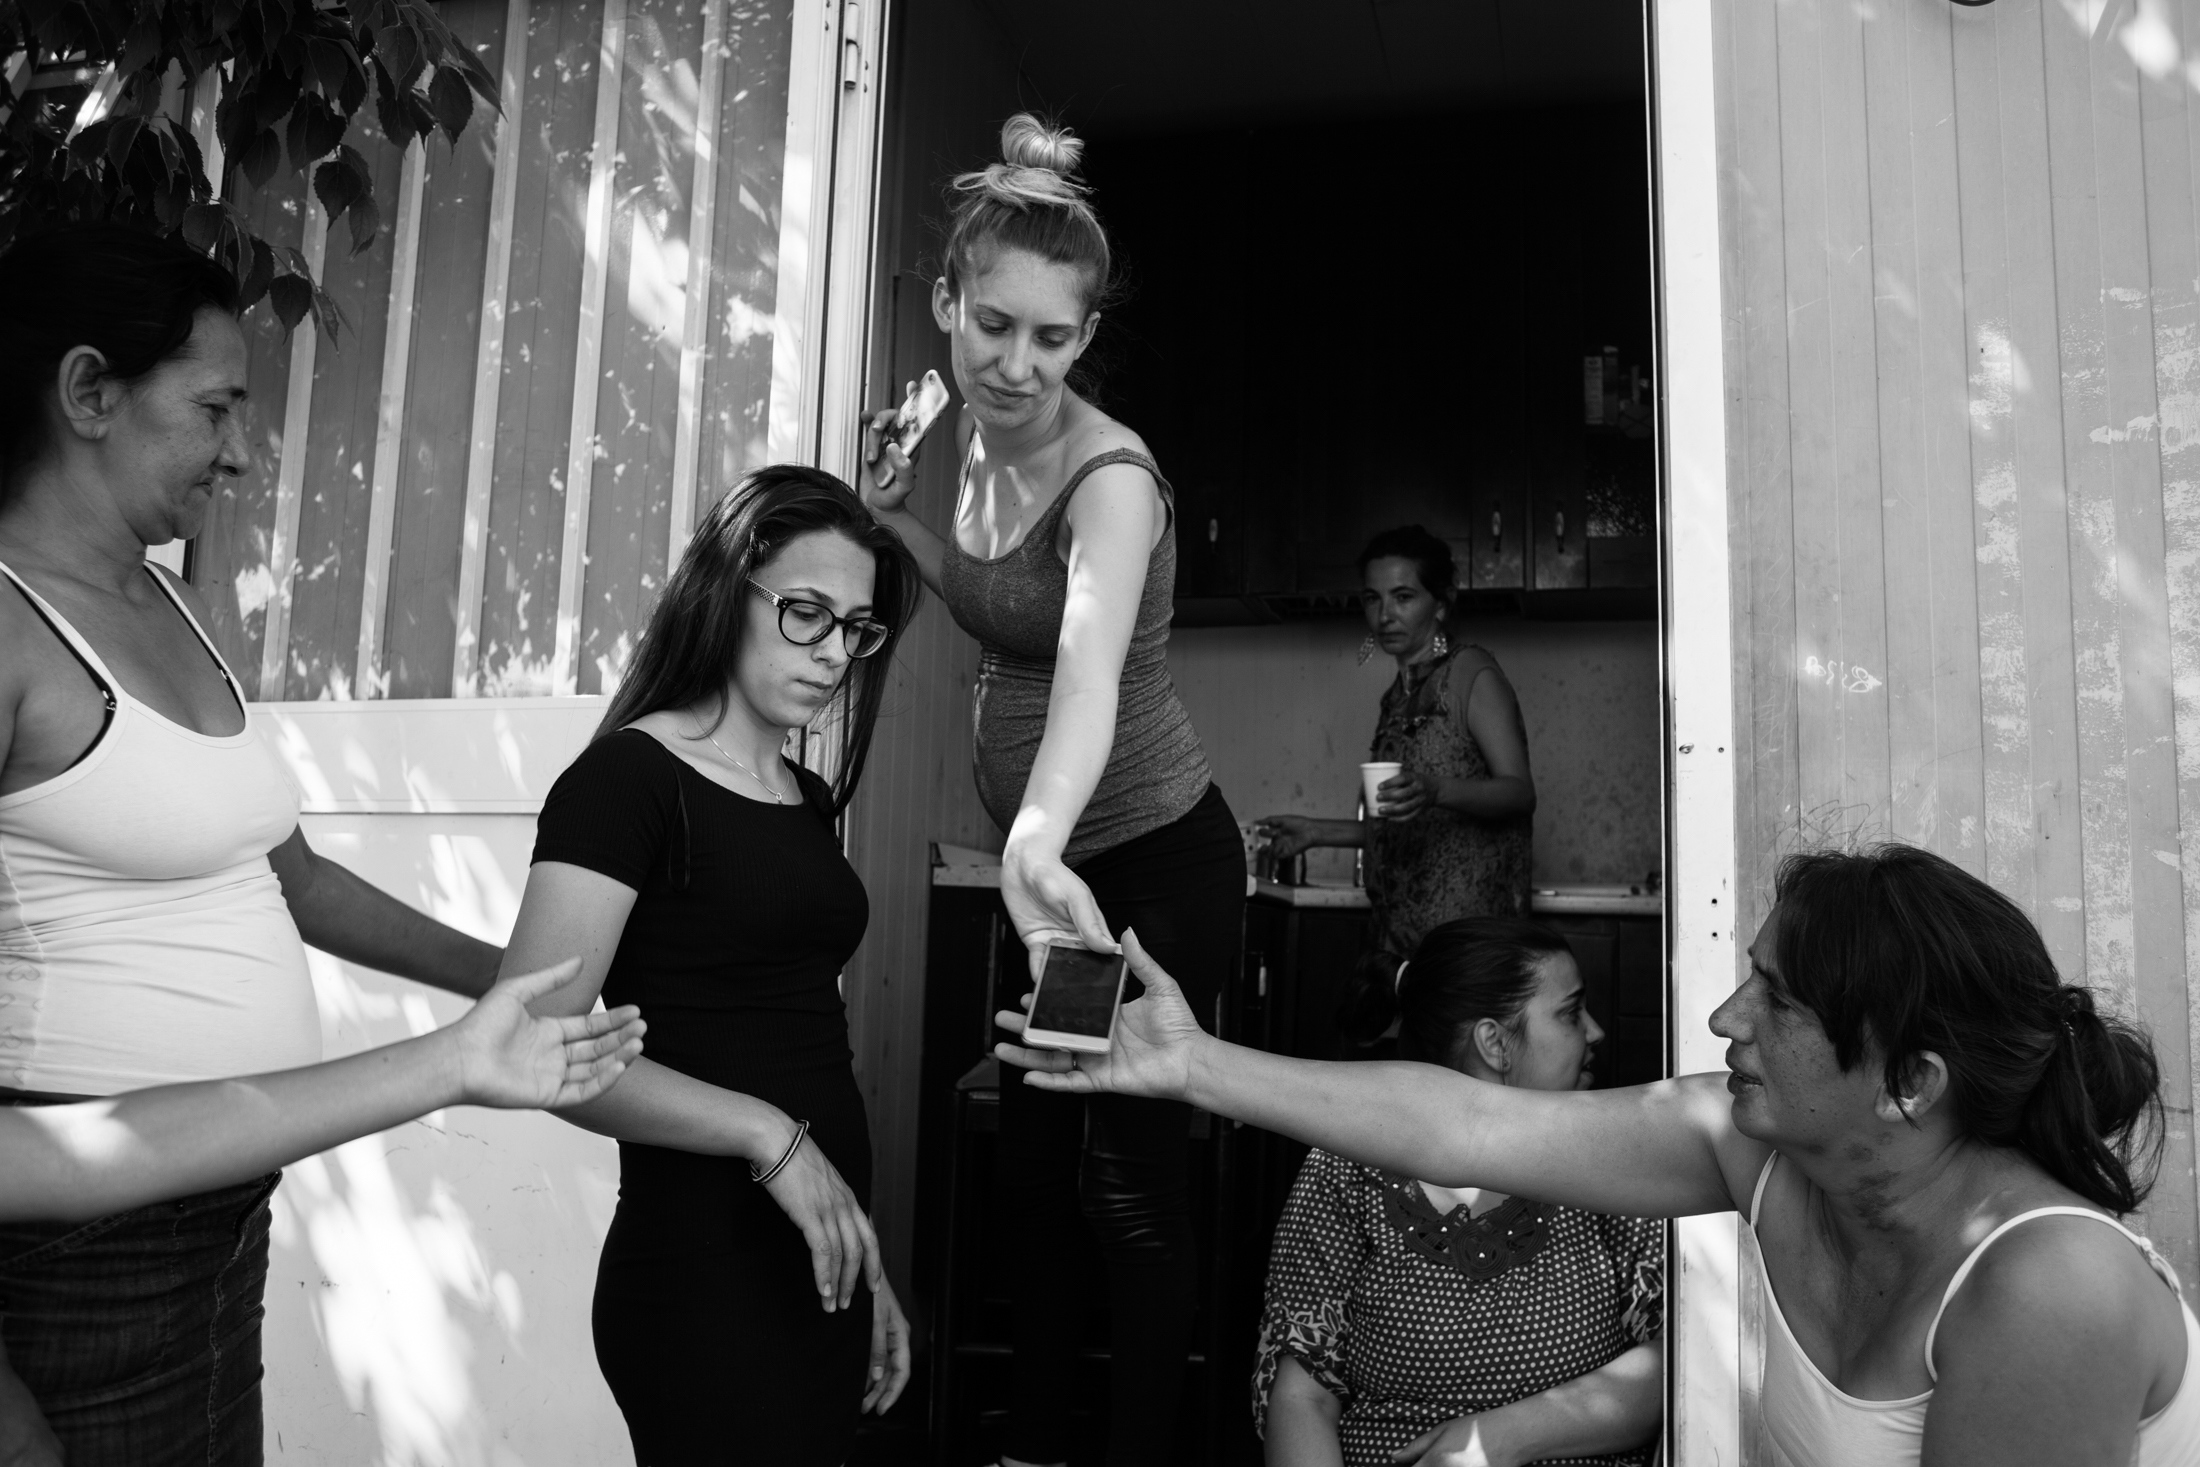 May 2017, nomad camp of Castelnuovo Rangone, Emilia Romagna, Italy. The women of different families exchange a smartphone to watch a news on the internet. Not everyone has a cell phone in the camp, and those who share it with the whole community.